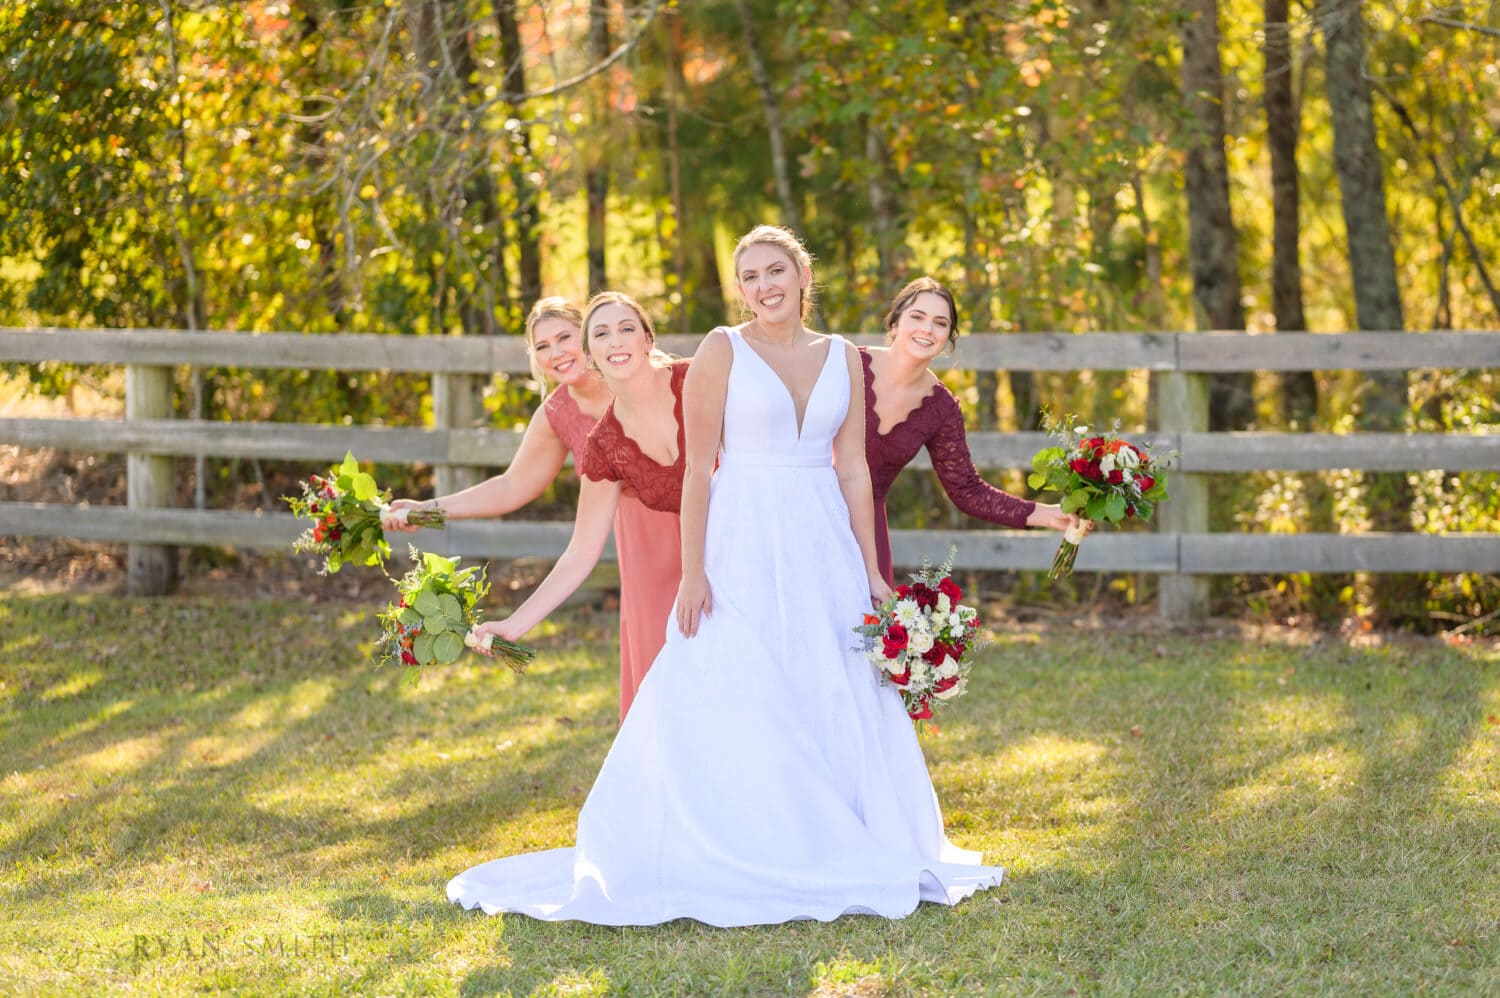 Bridesmaids peeking out from behind the bride - The Blessed Barn